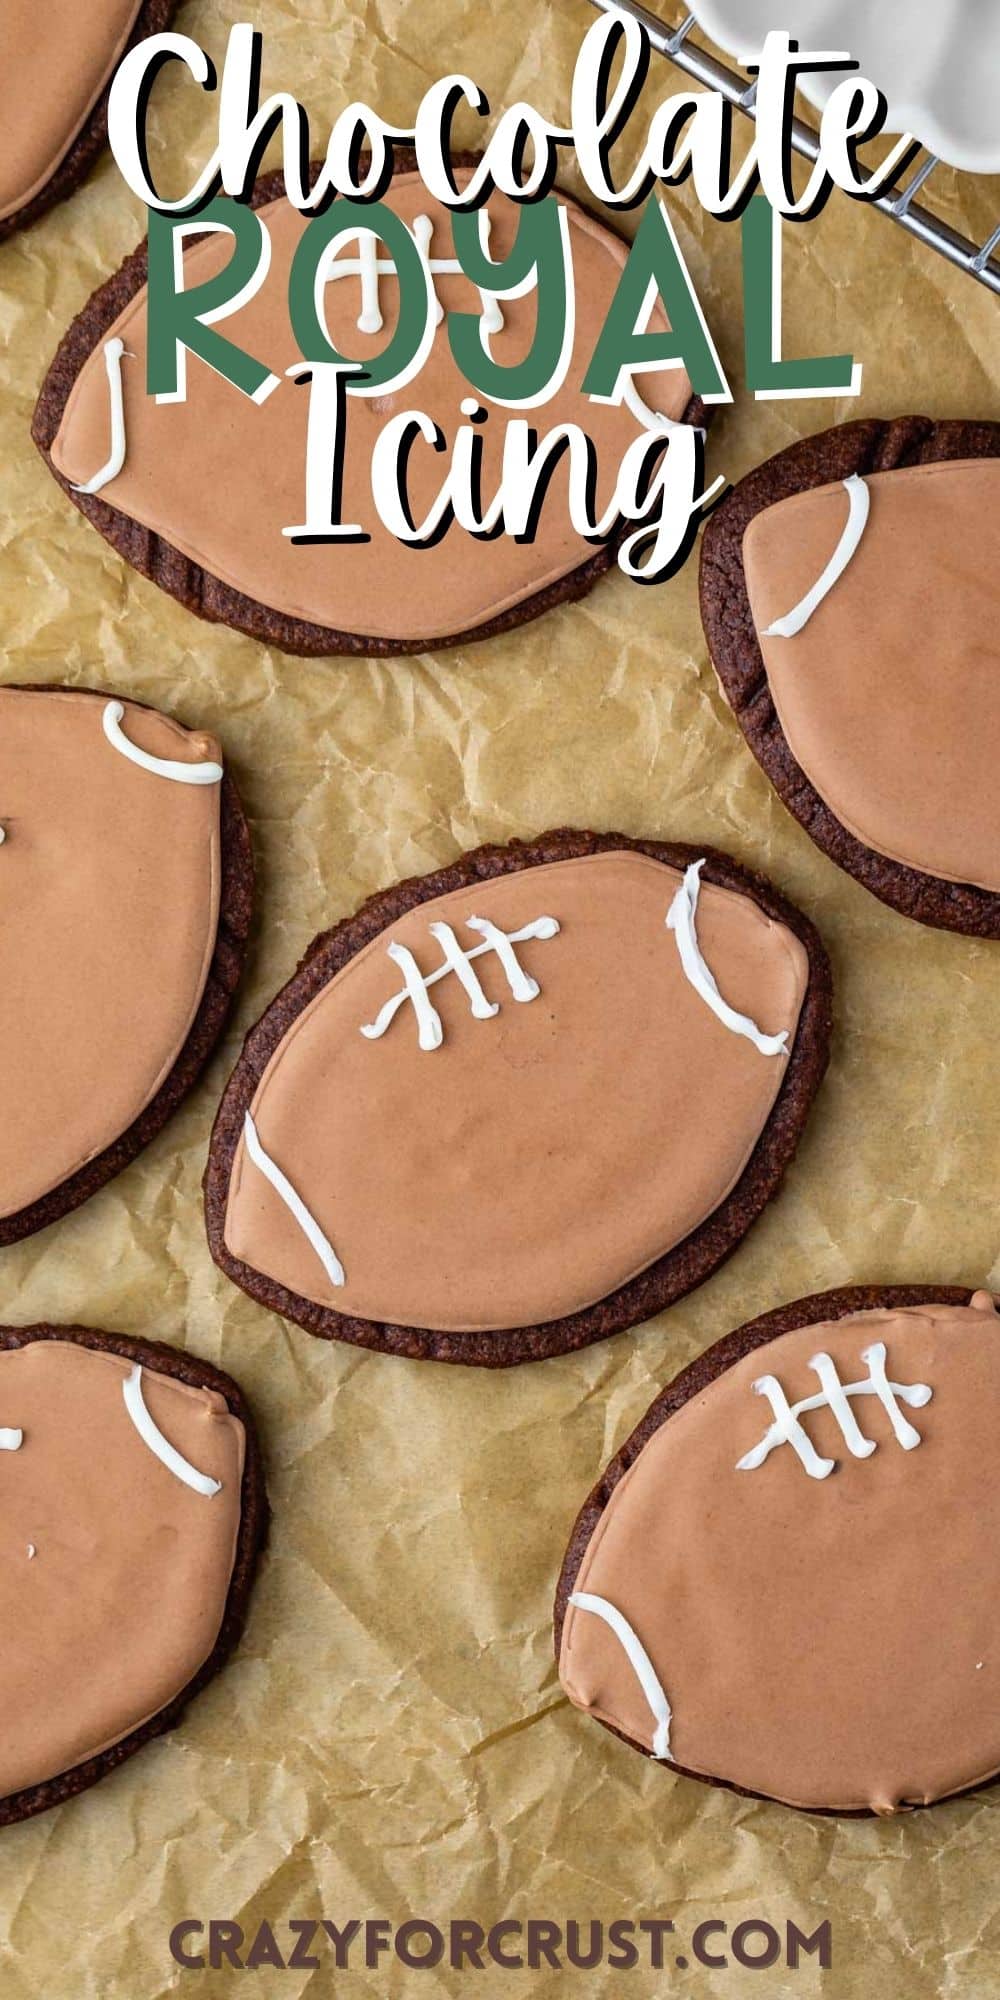 football shaped cookies with football themed chocolate icing with words on the image